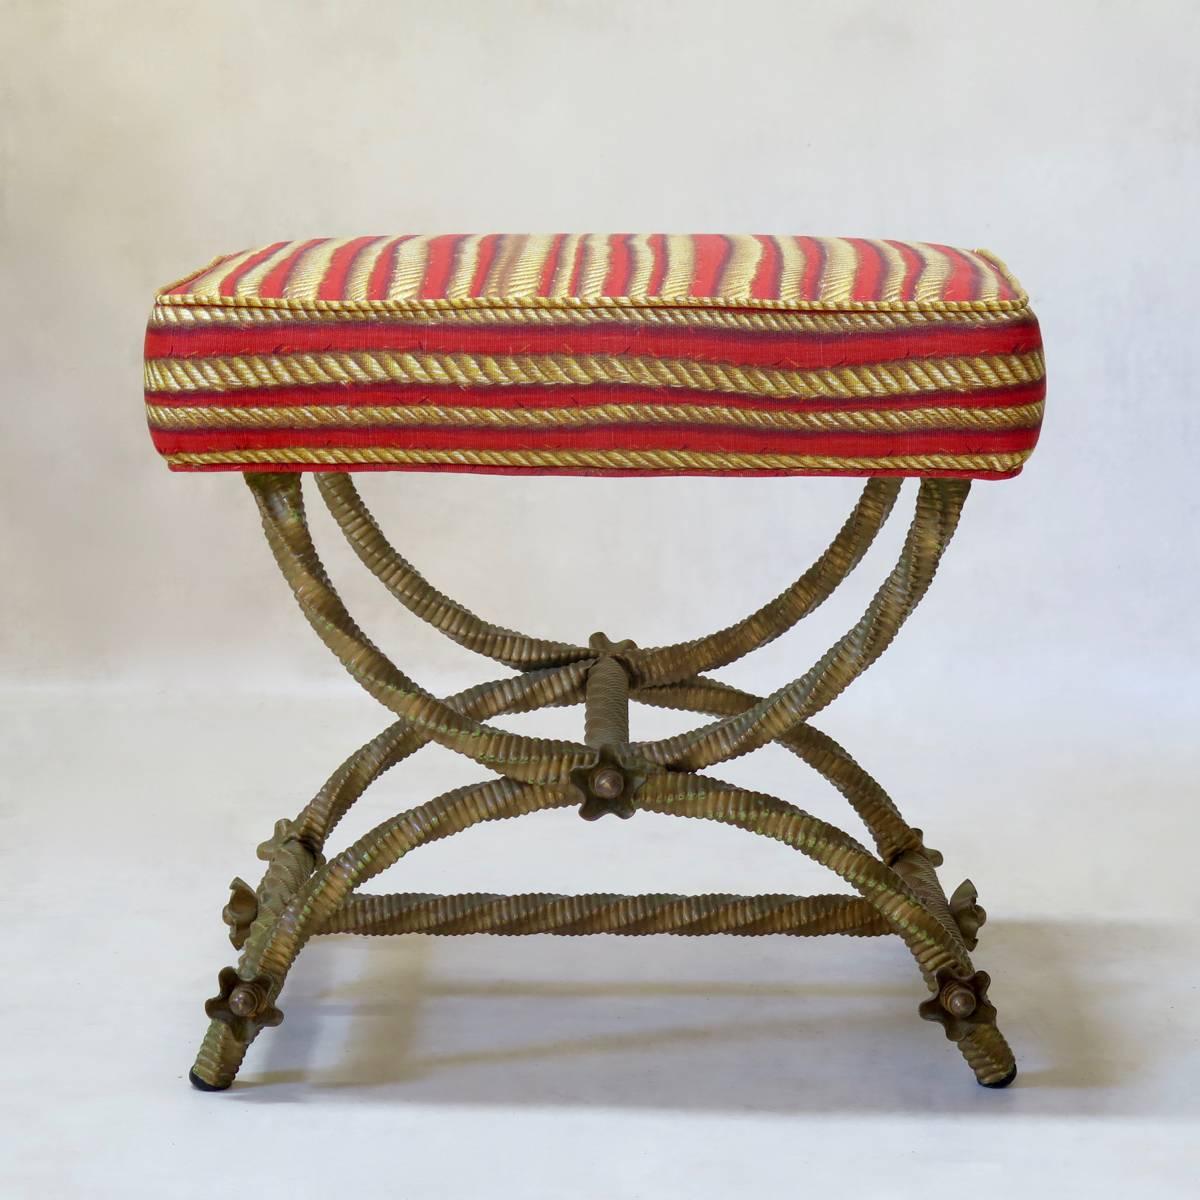 Unusual Curule-base stool/ottoman, with a gilt-iron twisted rope base (previous green paint visible beneath), adorned with rosettes. Upholstered in vintage yellow and red rope-design fabric. The pouf is heavy and nice quality.